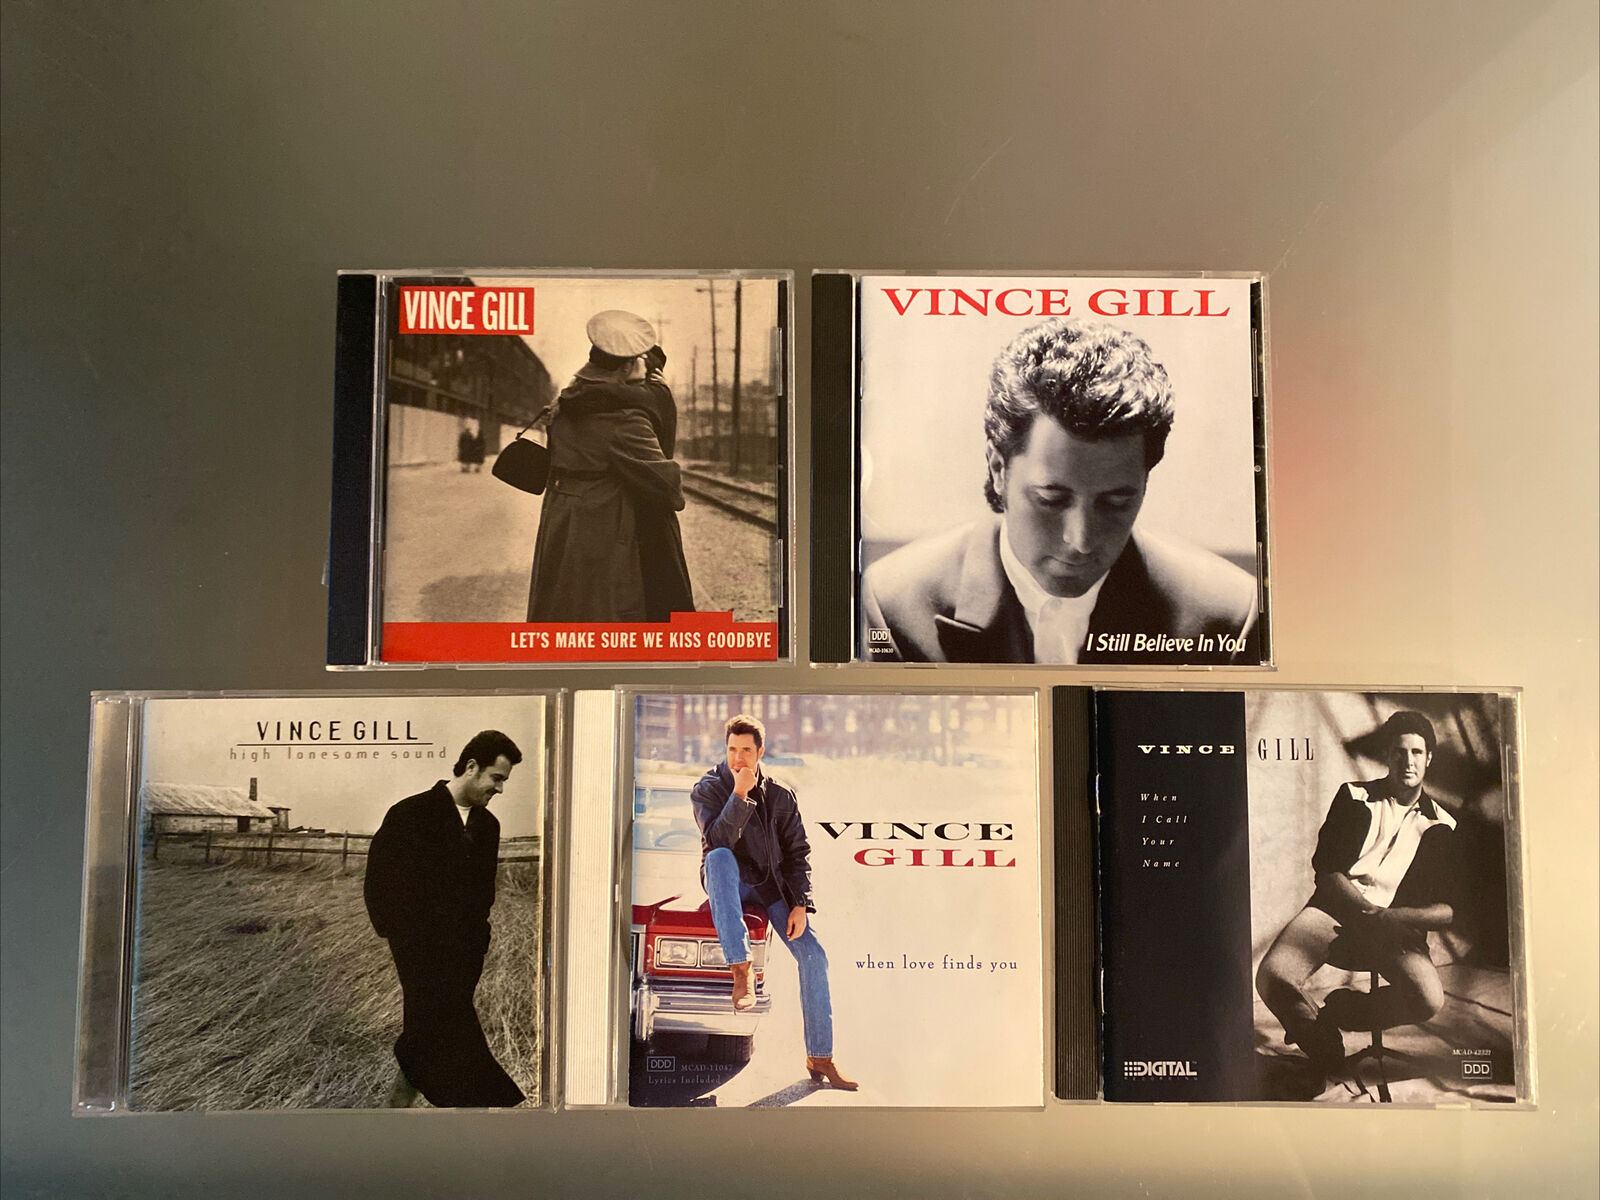 Vince Gill 5 LOT: Kiss Goodbye, Still Believe in You, High Lonesome, Love Finds